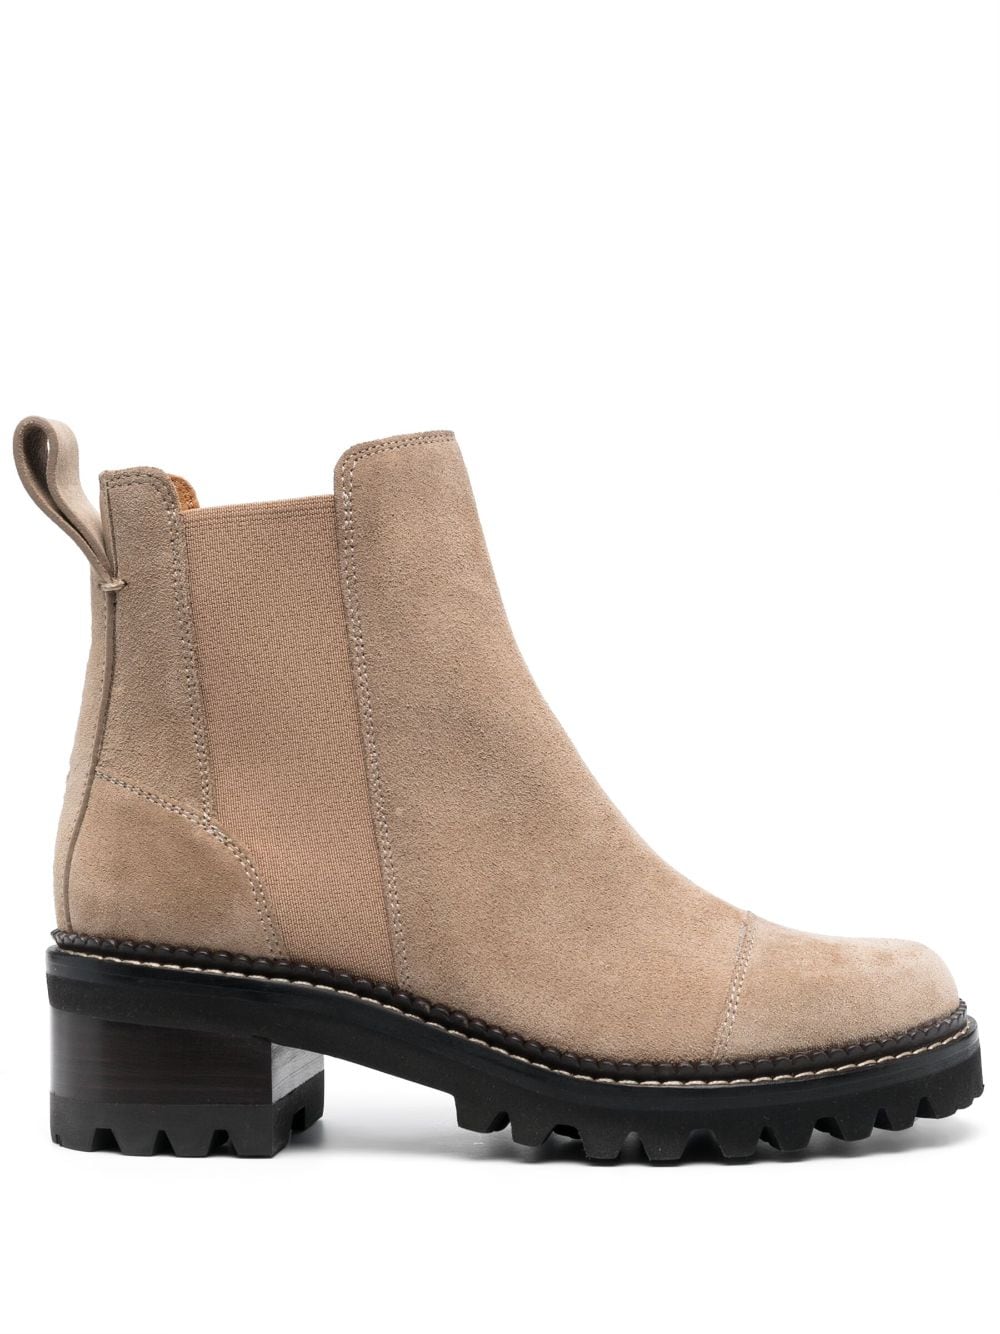 See by Chloé Mallory 55mm ankle boots - Neutrals von See by Chloé